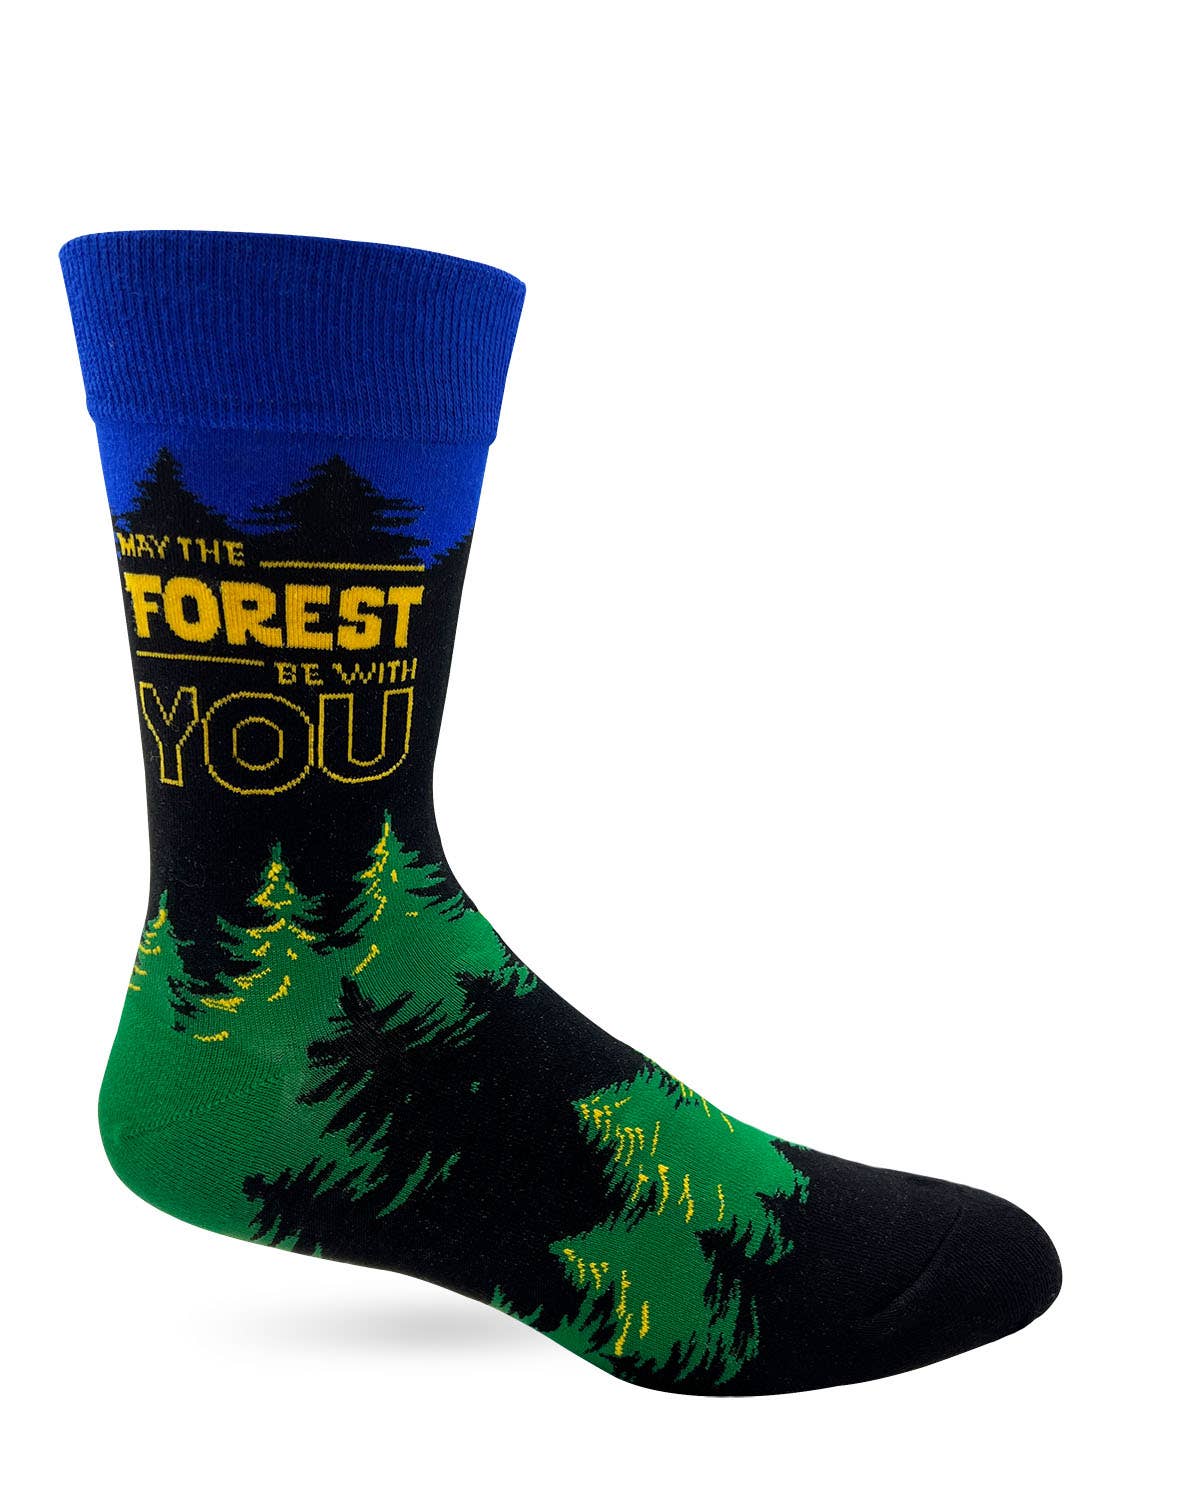 May The Forest Be With You - Men's Novelty Crew Socks